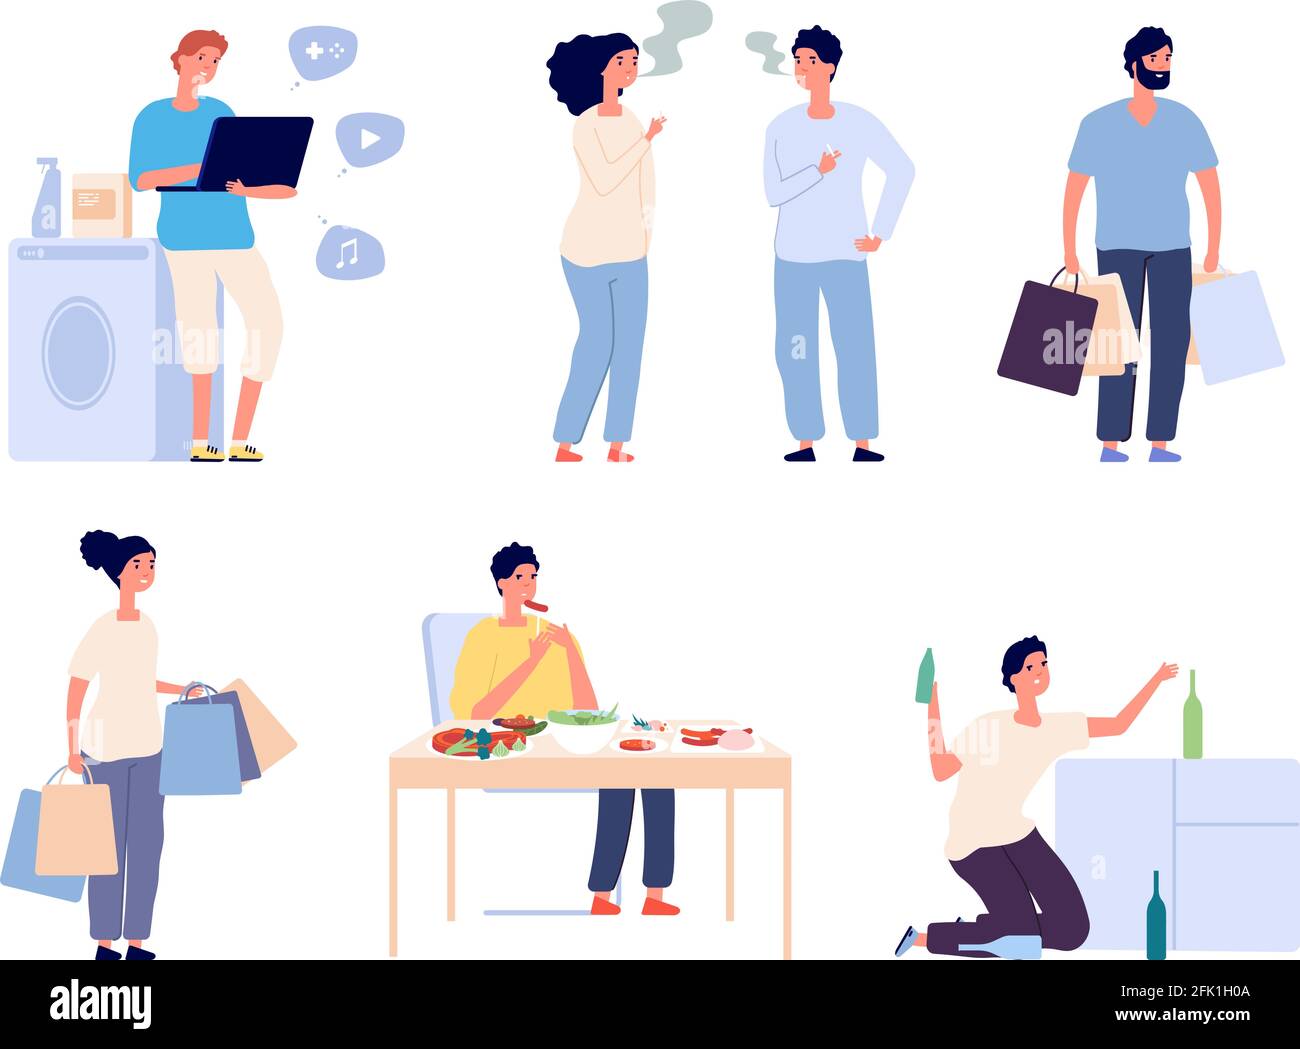 Adult bad habits. Different addictions, people drink alcohol, smoking overeating shopping. Isolated man woman characters with behavior disorders or Stock Vector